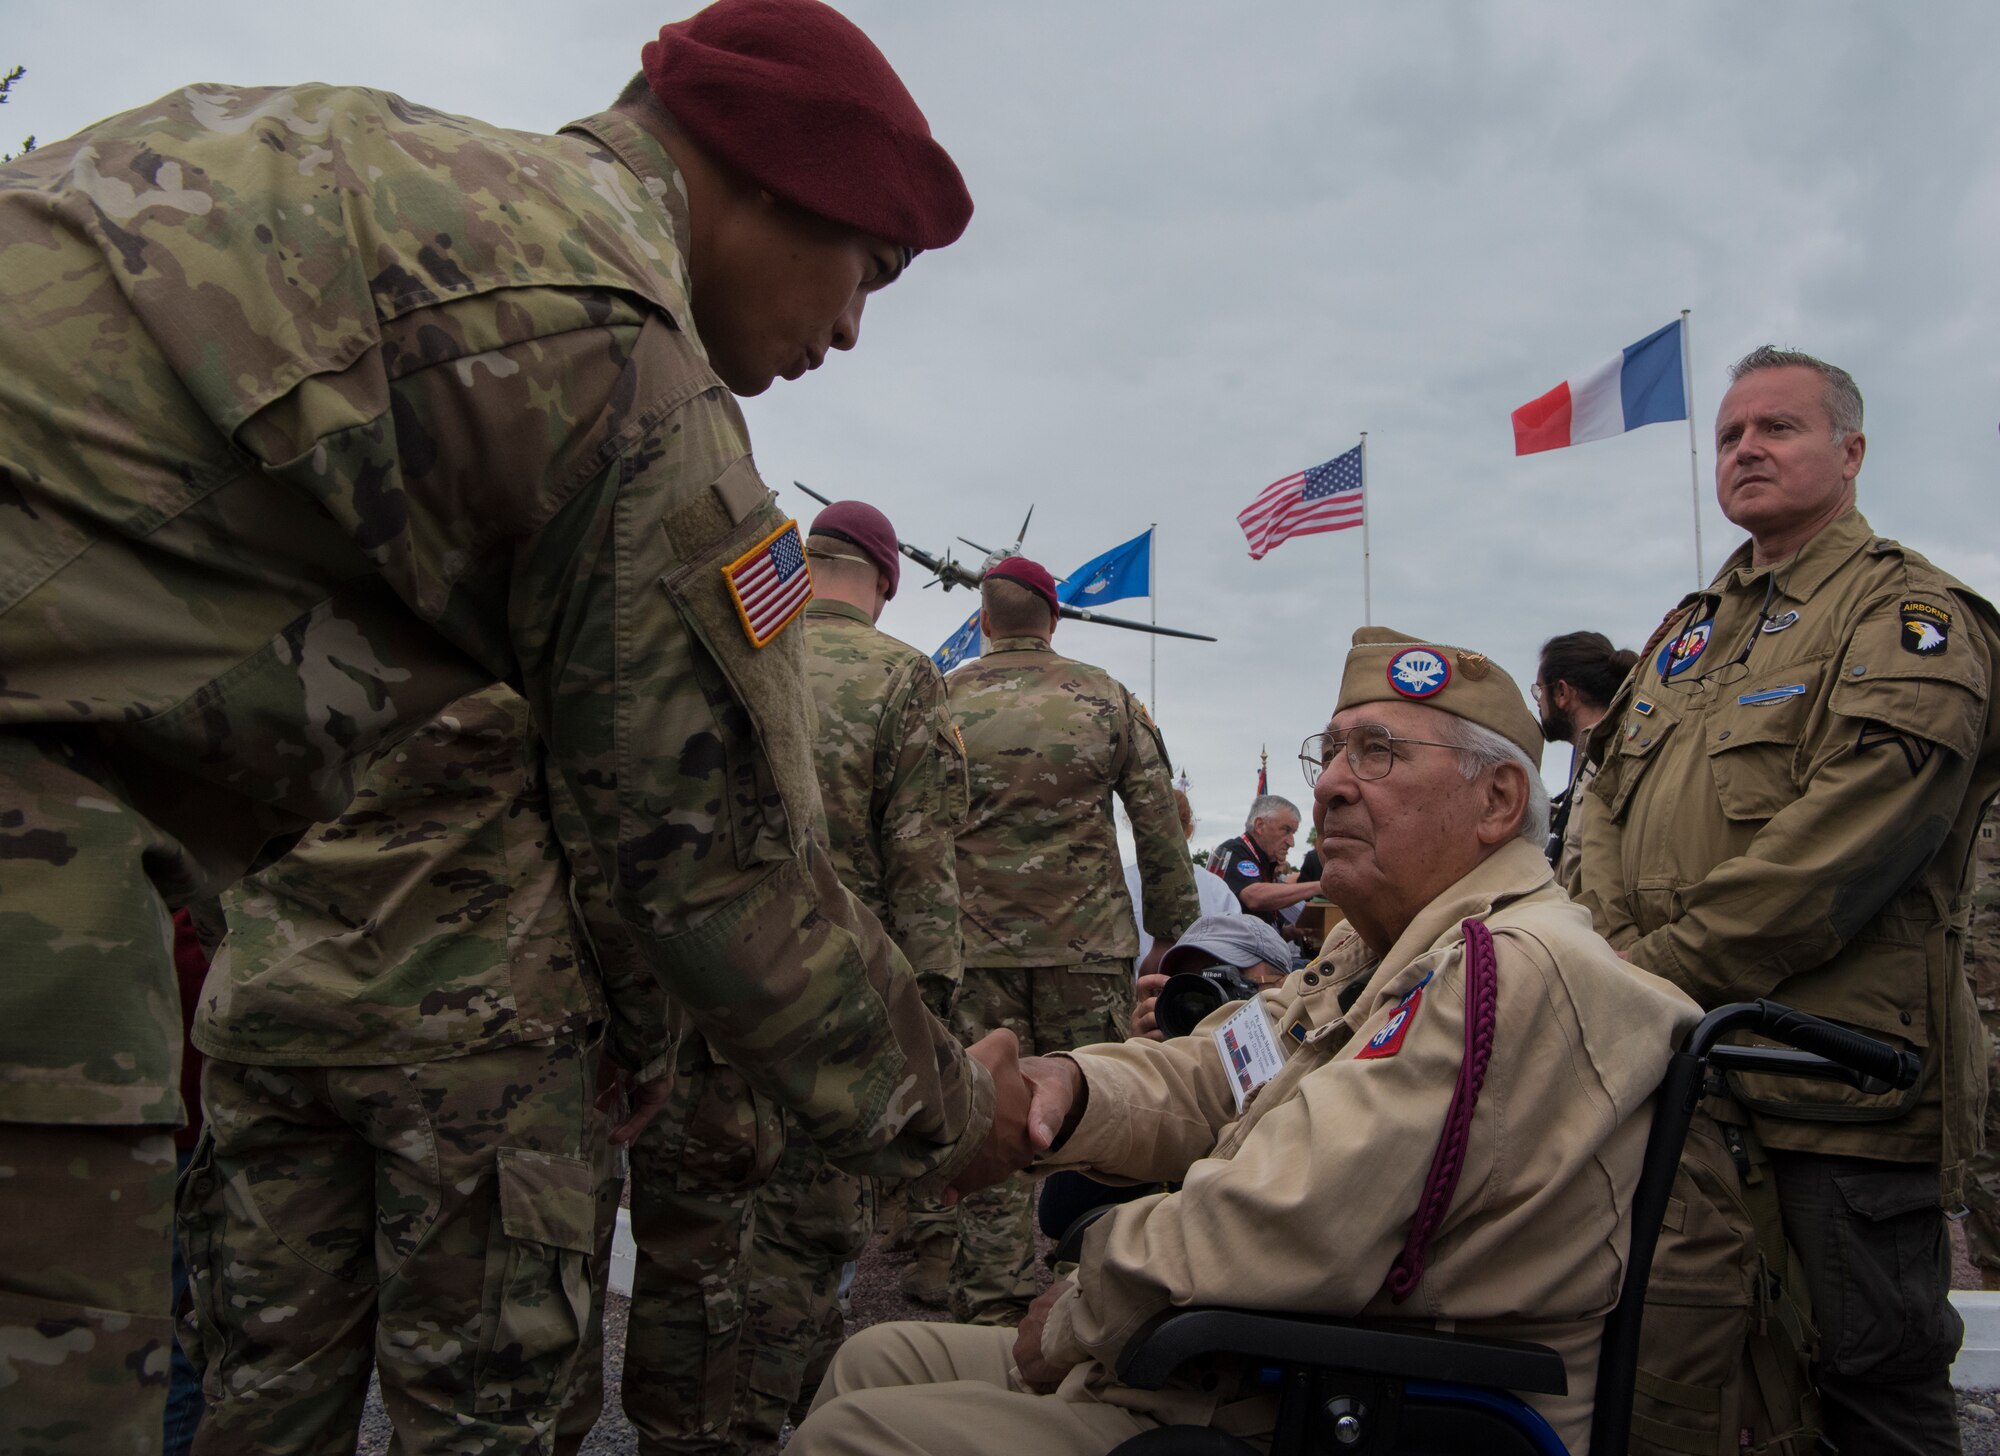 A U.S. Army airborne infantryman shakes the hand of retired Private First Class Joseph Morettini, 82nd Airborne, 508th Regiment, Easy Company, during a ceremony held to honor all airborne troops and flight crew that served on D-Day in Picauville, France, June 4, 2019. On June 6, 1944, Morettini dropped from midnight skies into Normandy with the objective to overtake an enemy stronghold near Picauville. During the ceremony’s conclusion, Morettini remarked to each active U.S. airborne infantrymen he shook hands with: “I dropped here 75 years ago.” (U.S. Air Force photo by Senior Airman Kristof J. Rixmann)